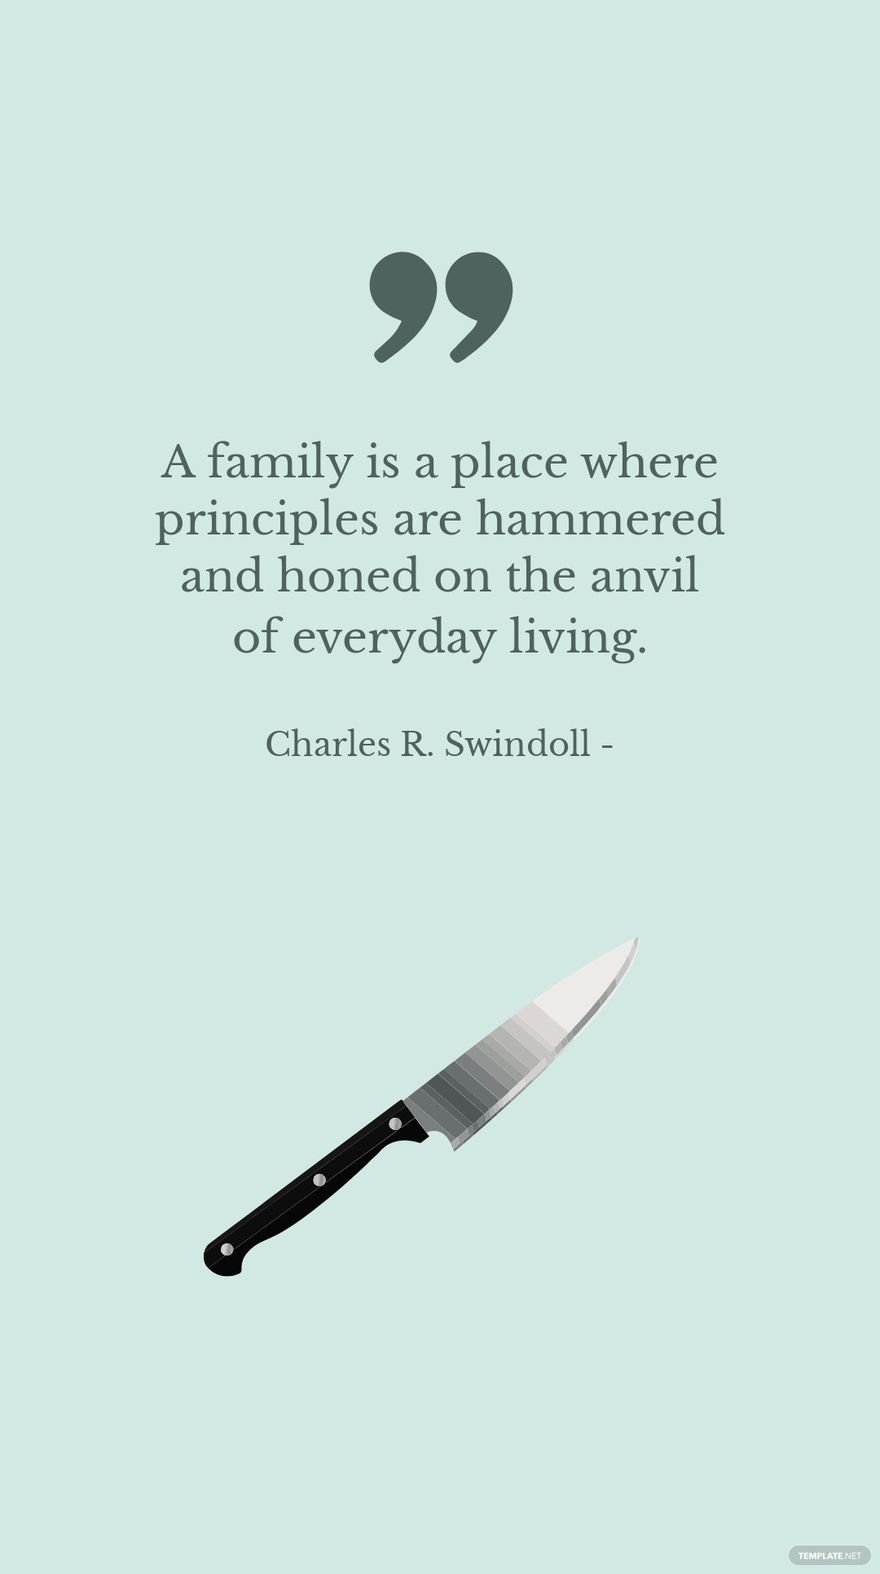 Free Charles R. Swindoll - A family is a place where principles are hammered and honed on the anvil of everyday living. in JPG